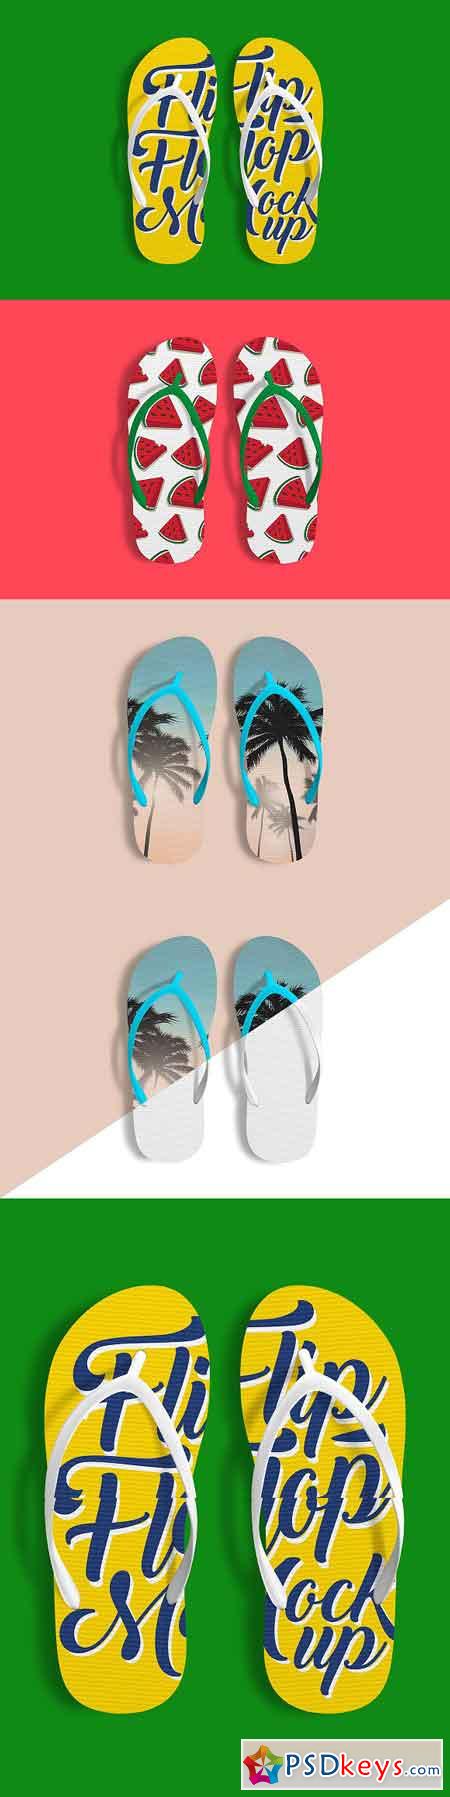 Download Slippers Free Download Photoshop Vector Stock Image Via Torrent Zippyshare From Psdkeys Com